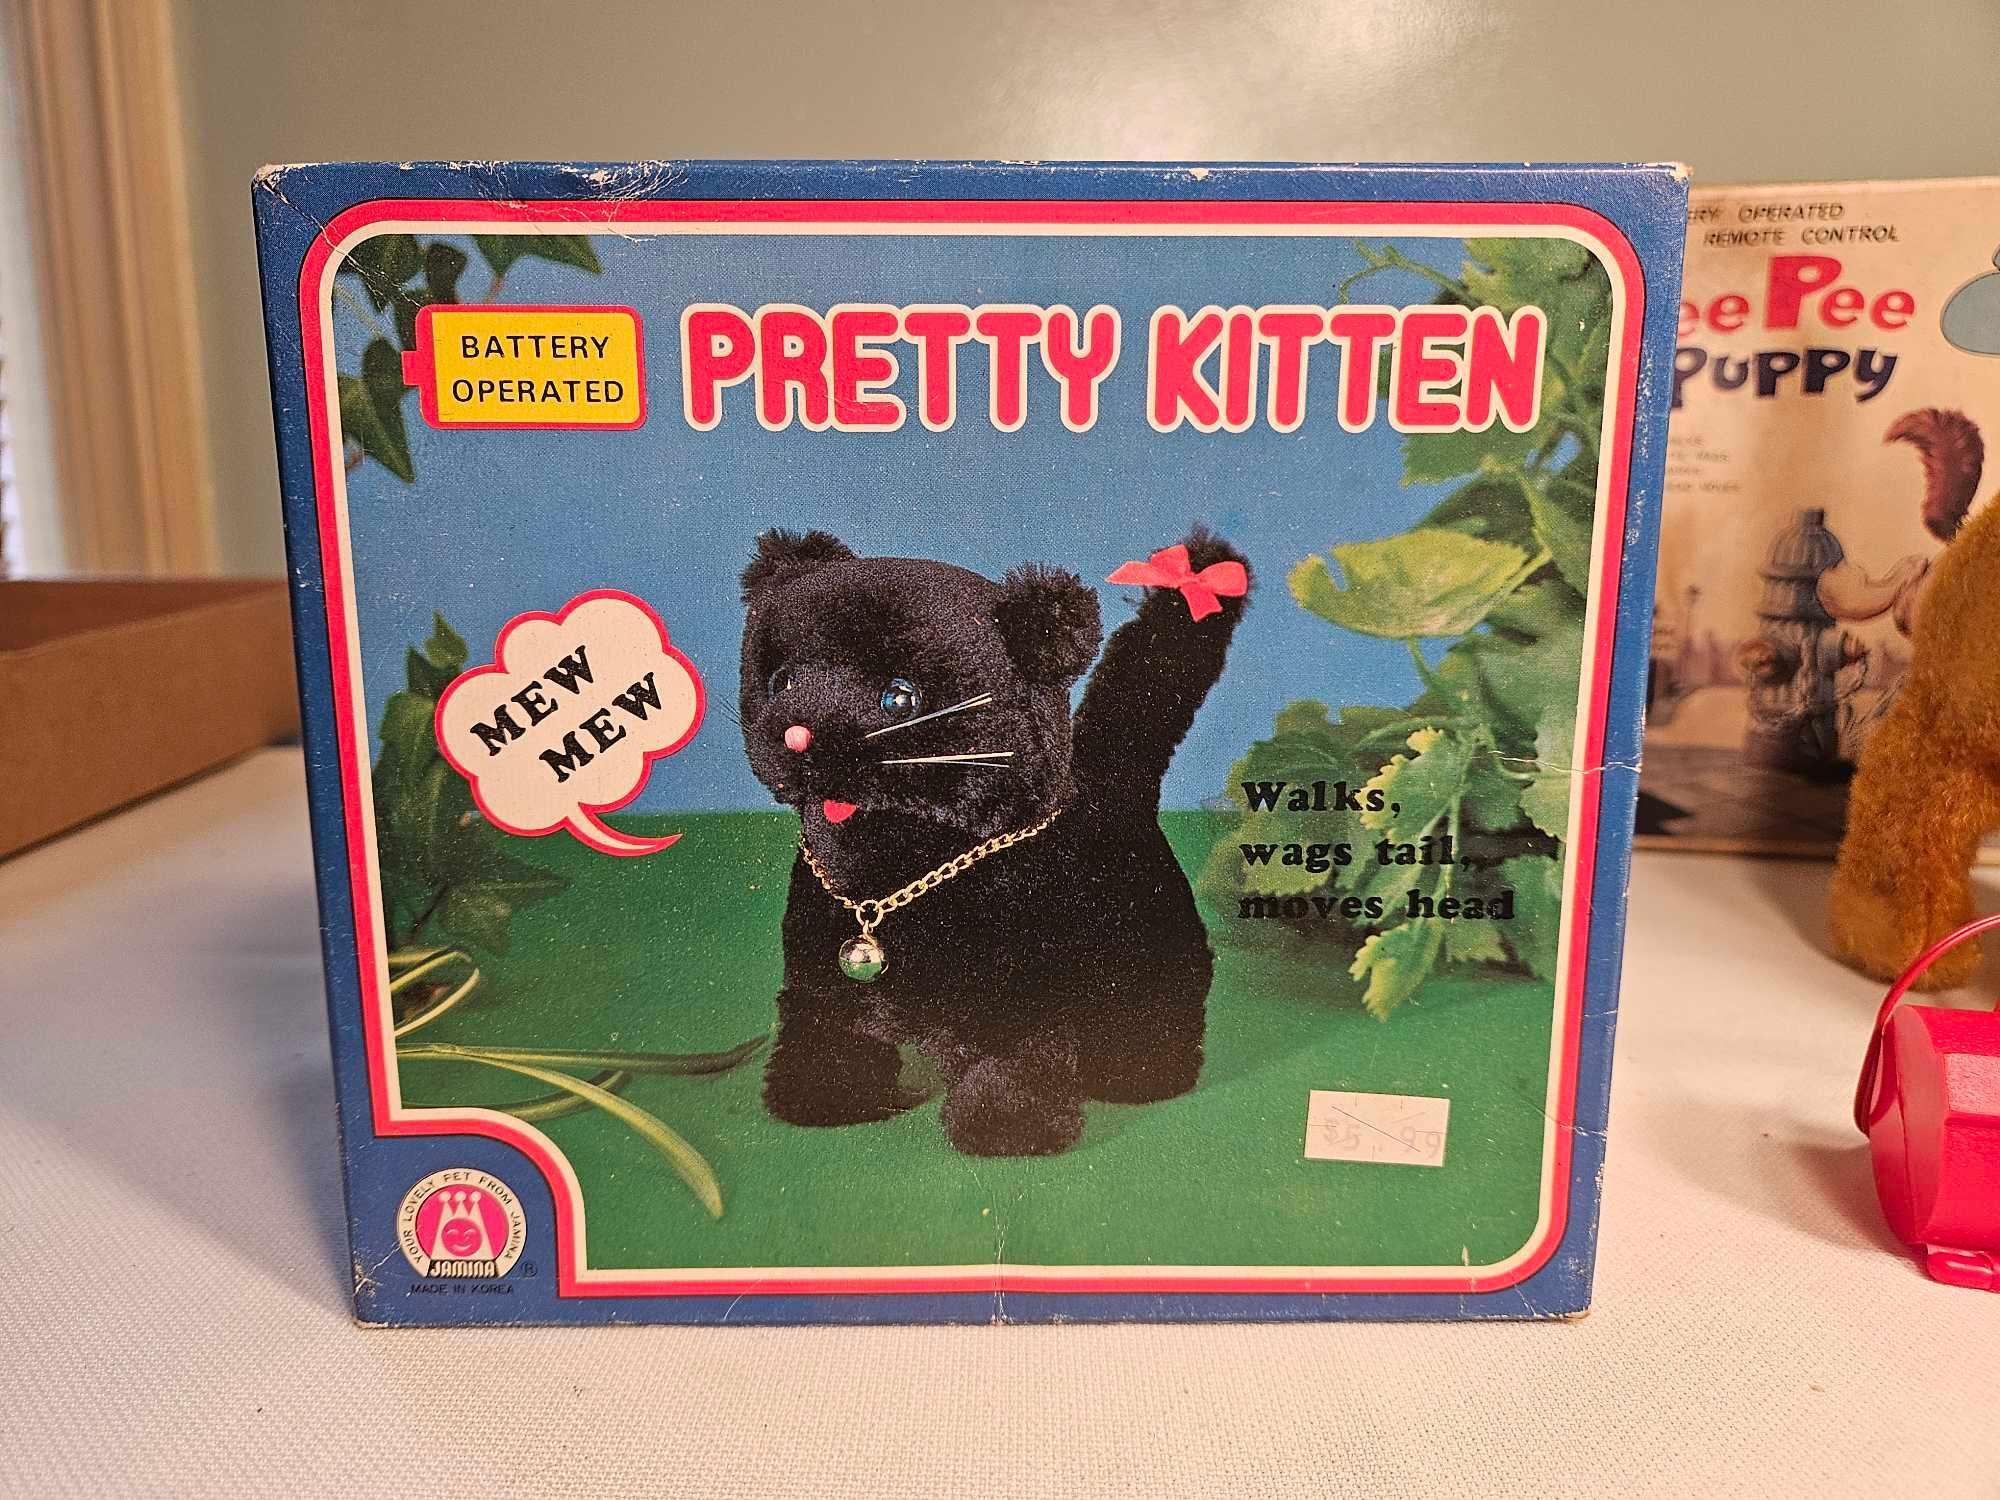 Battery Operated Pretty Kitten and Pee Pee Puppy